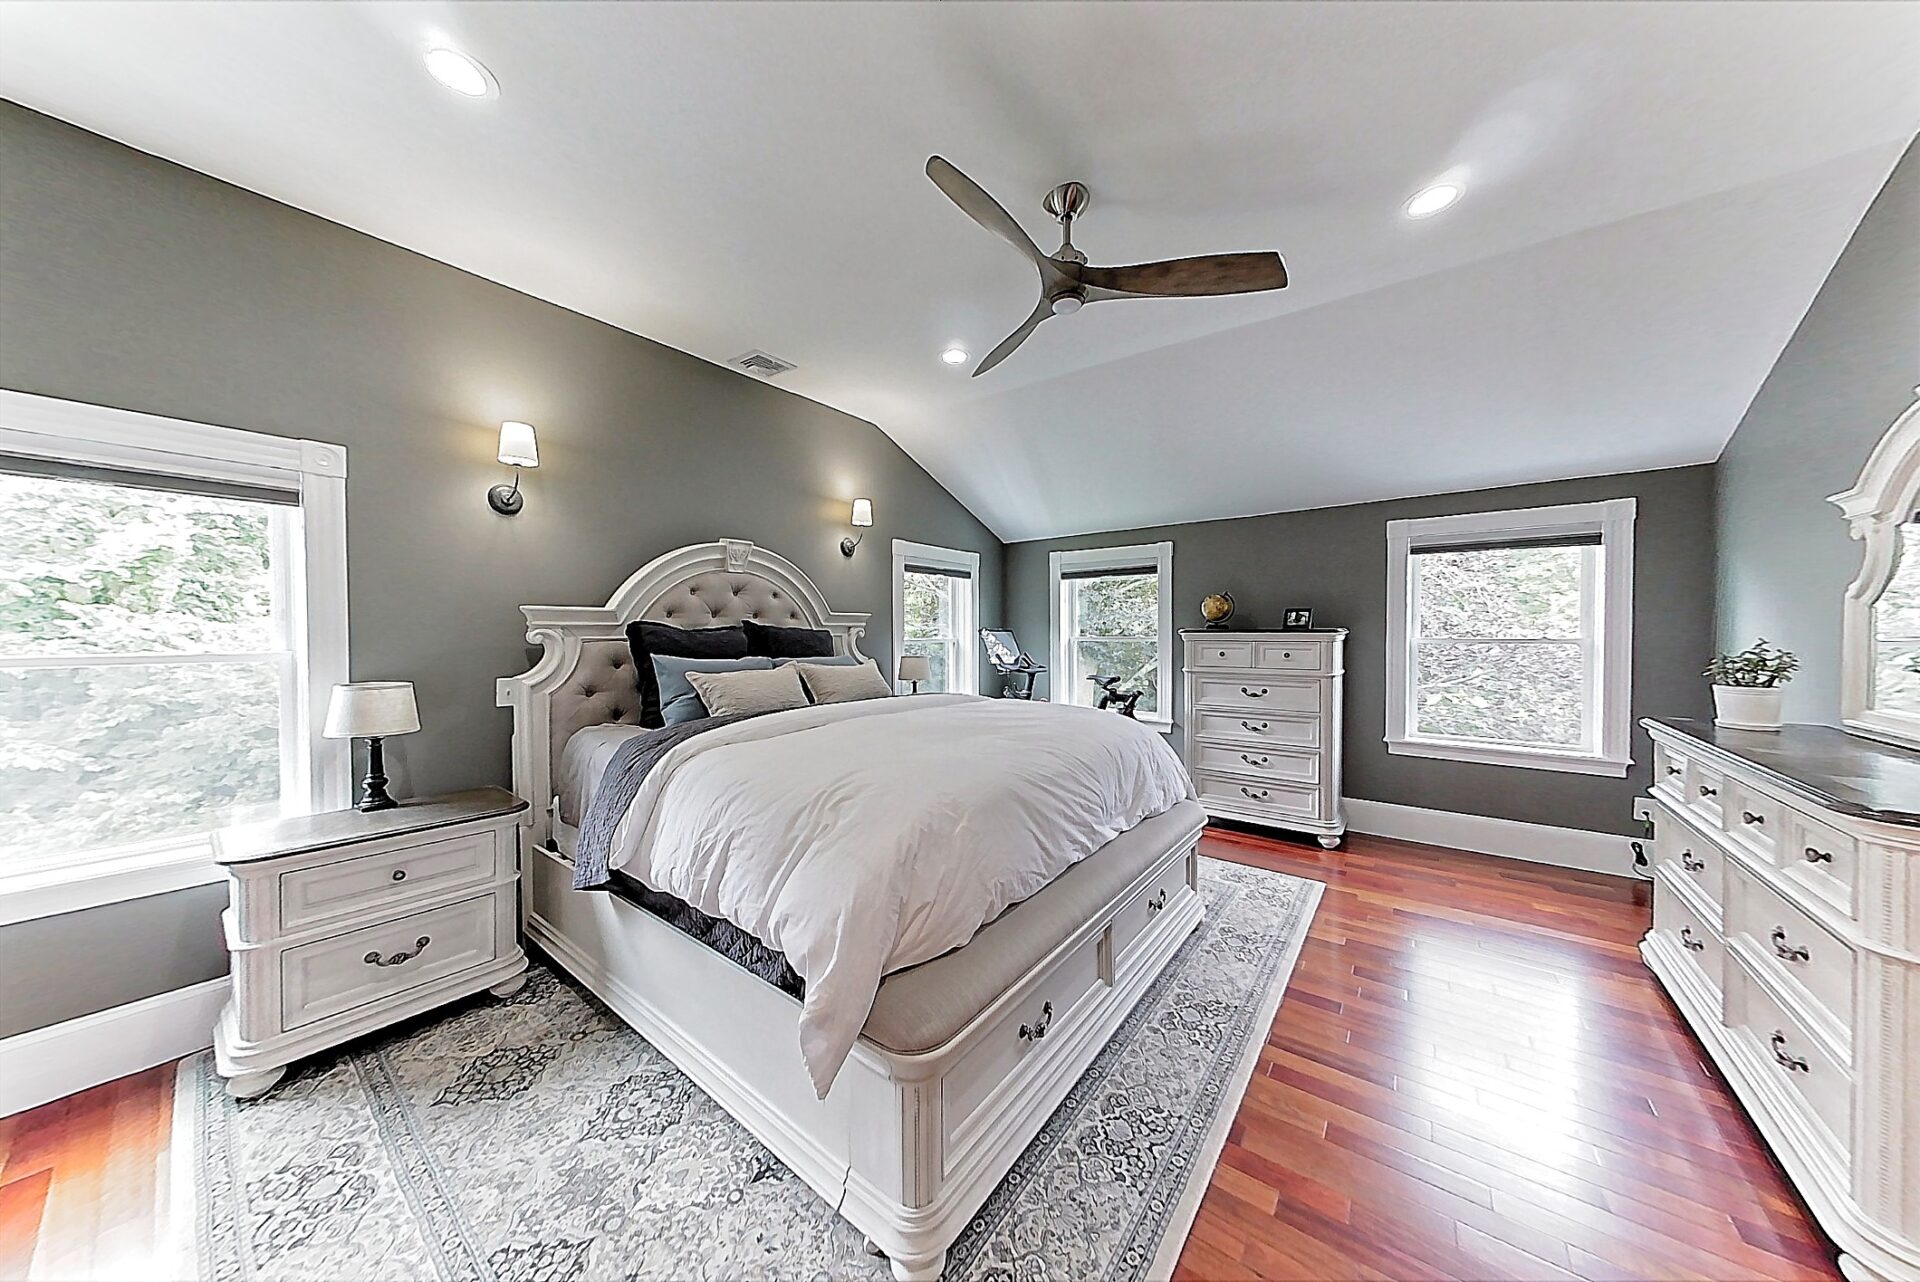 Image of the primary bedroom in a 2-story colonial style home in Rehoboth, MA.